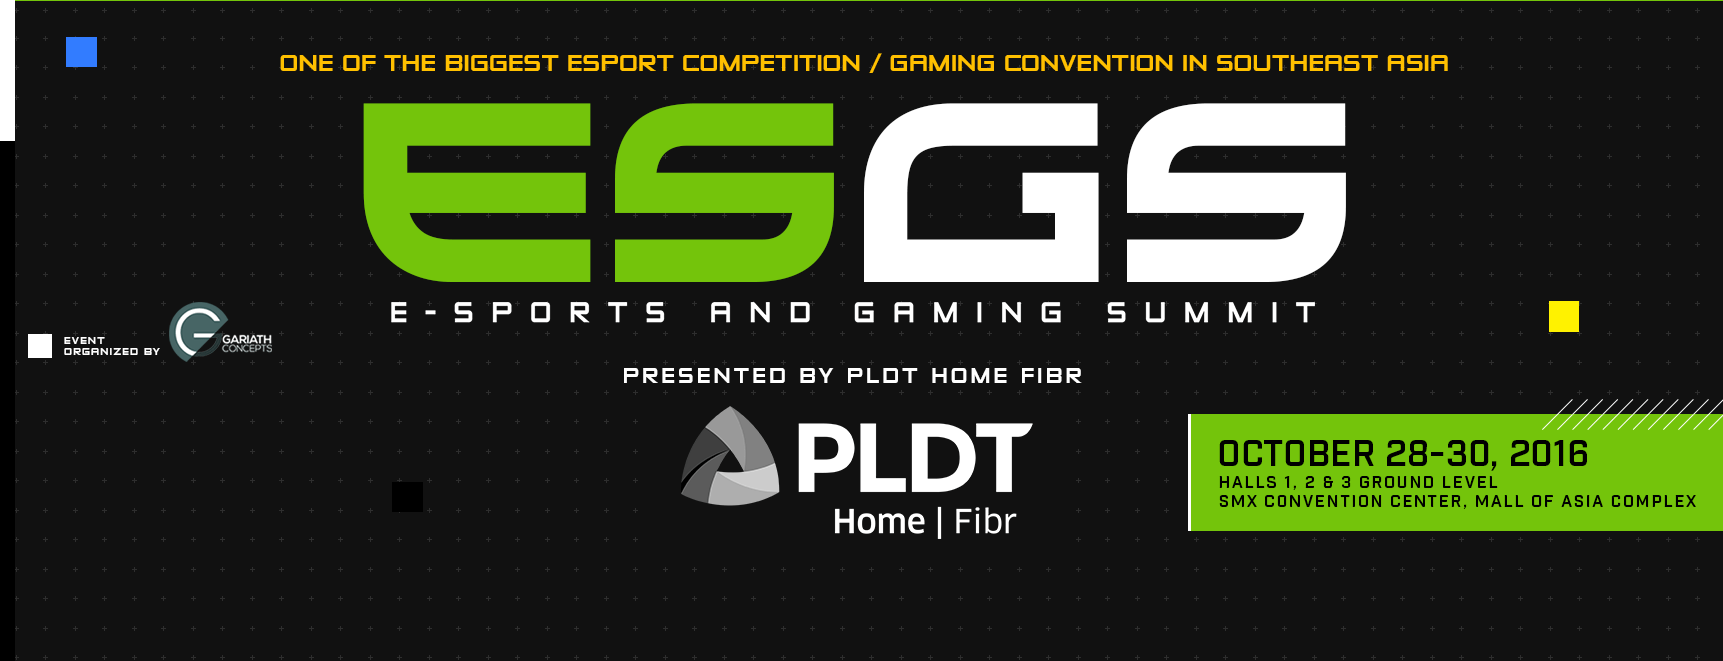 The Hype Continues with E-Sports and Gaming Summit 2016 24